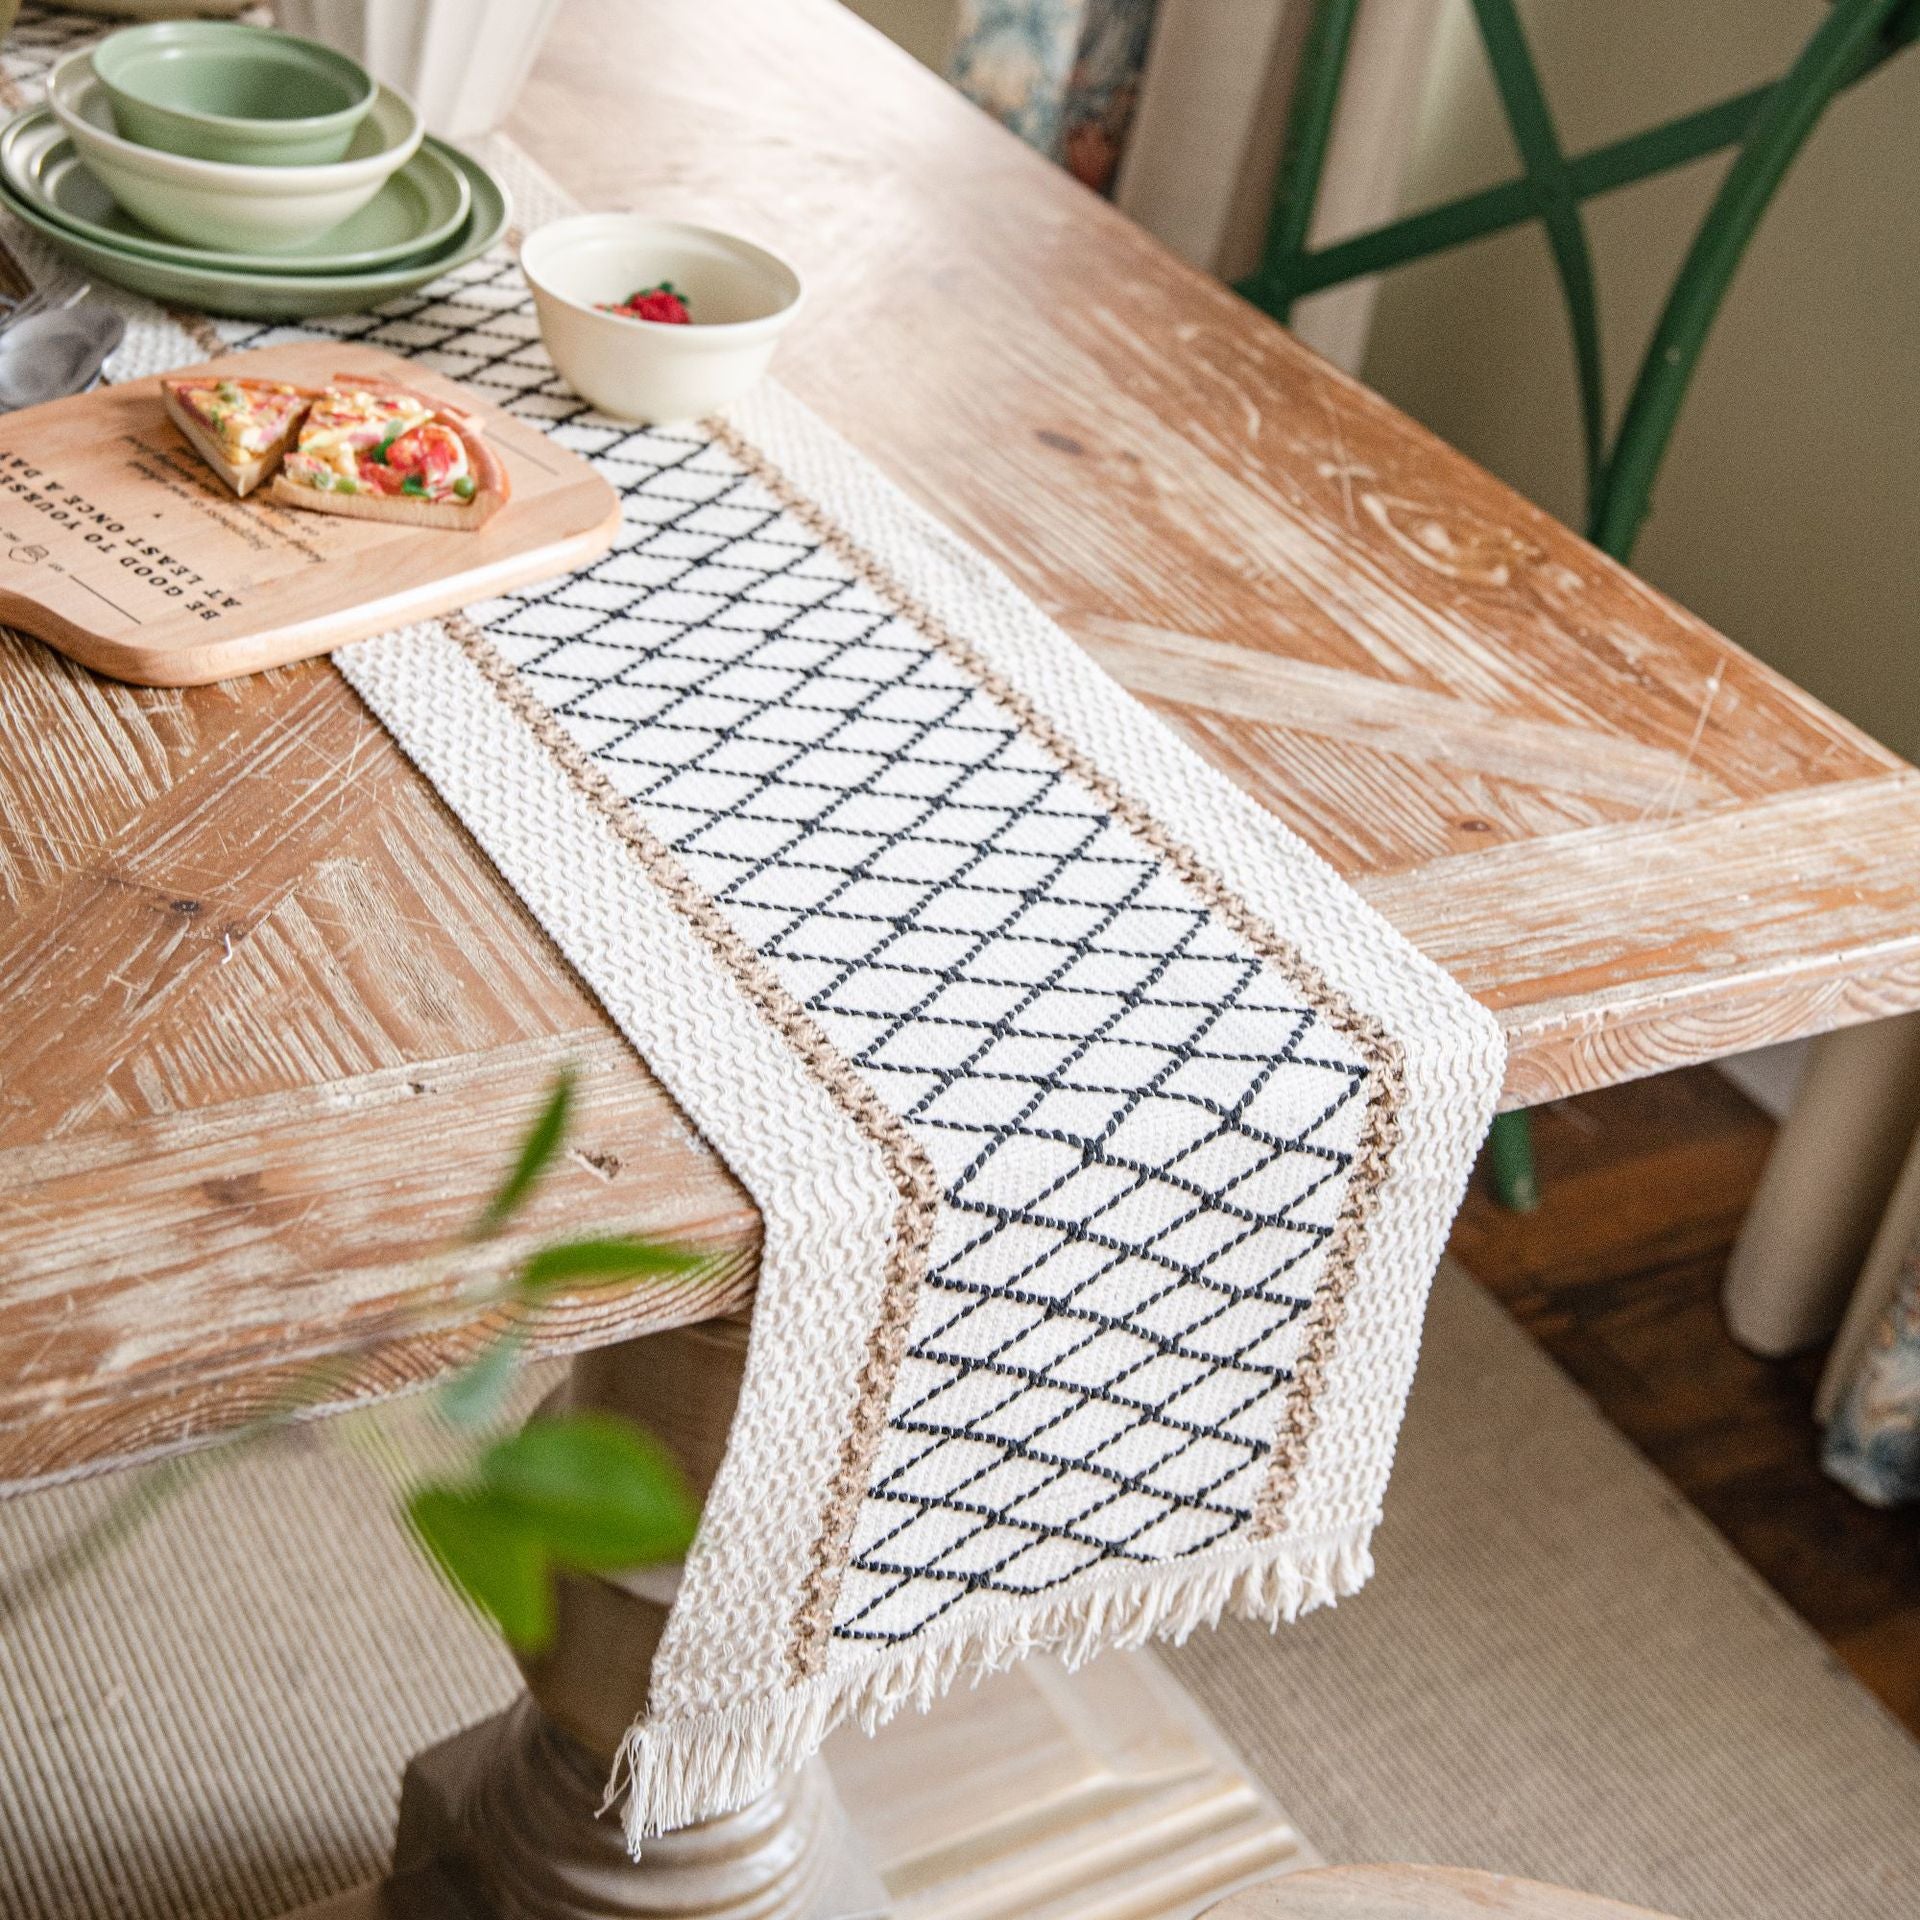 30X200 : 11.81″ * 78.74″, MULTI PATTERNED TABLE CLOTH TABLE RUNNER